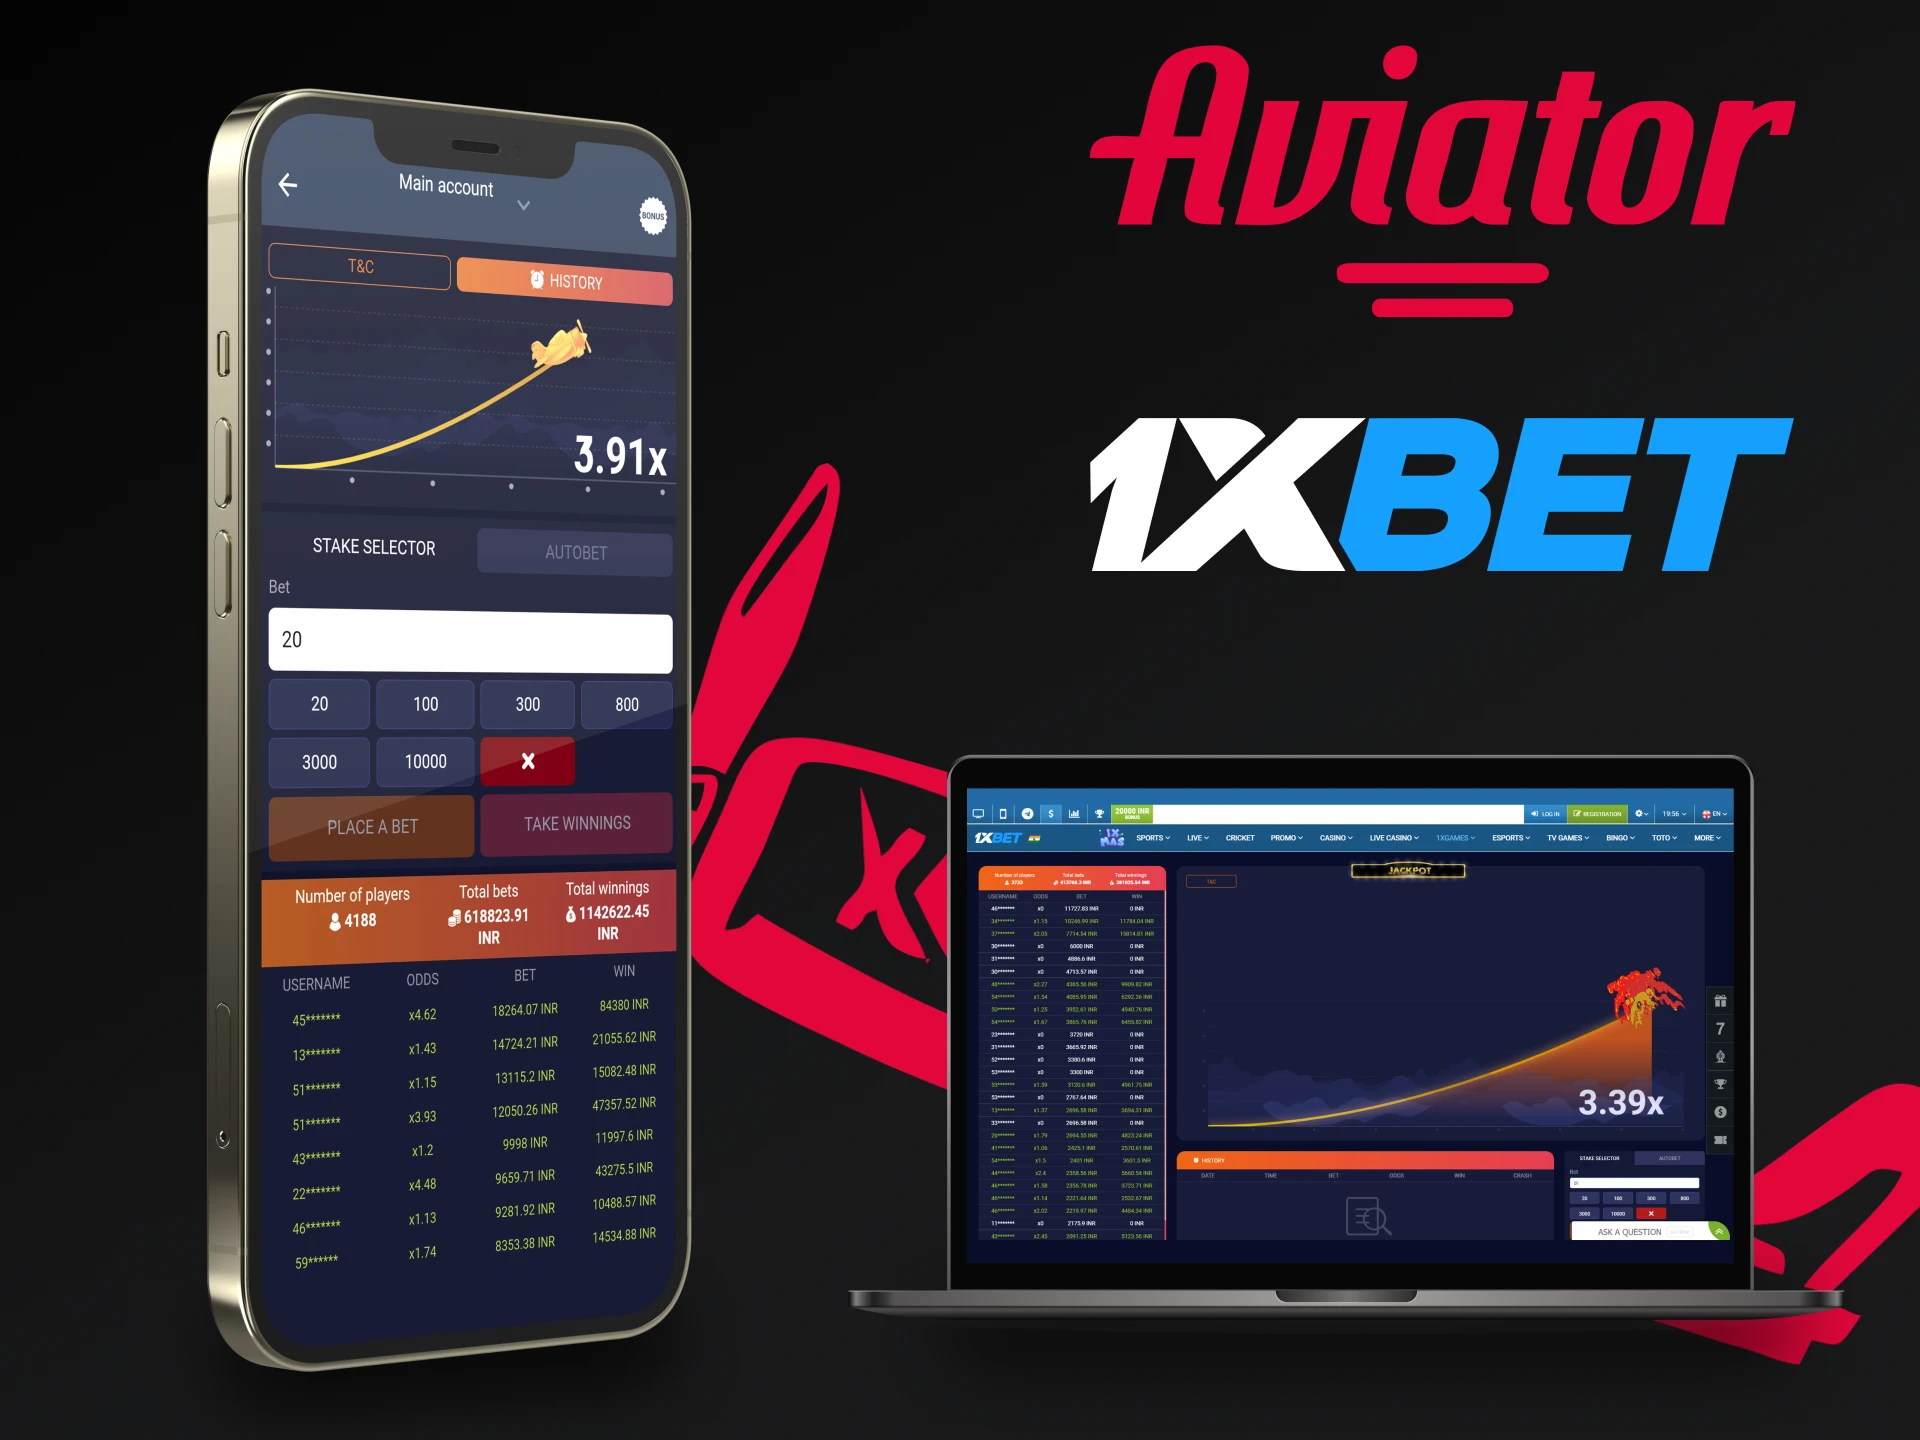 Choose a convenient way to play aviator from 1xbet.